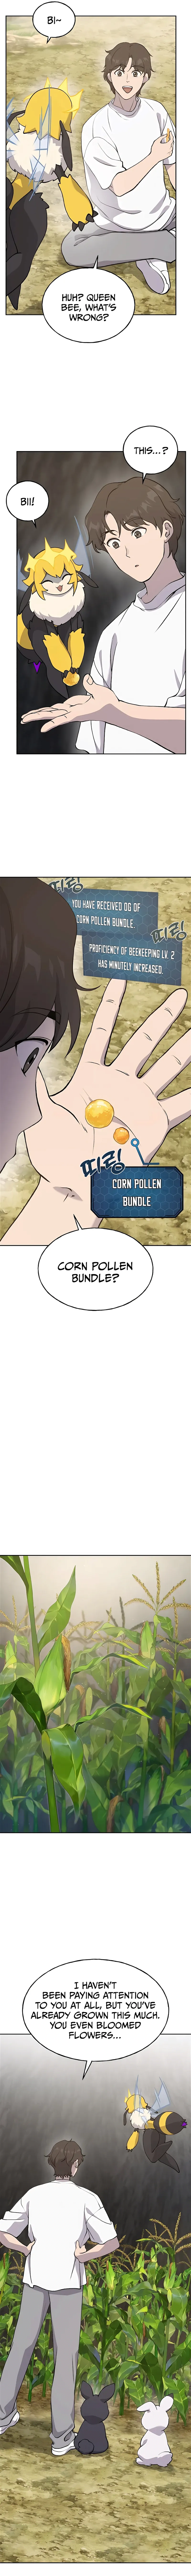 Solo Farming In The Tower Chapter 22 page 9